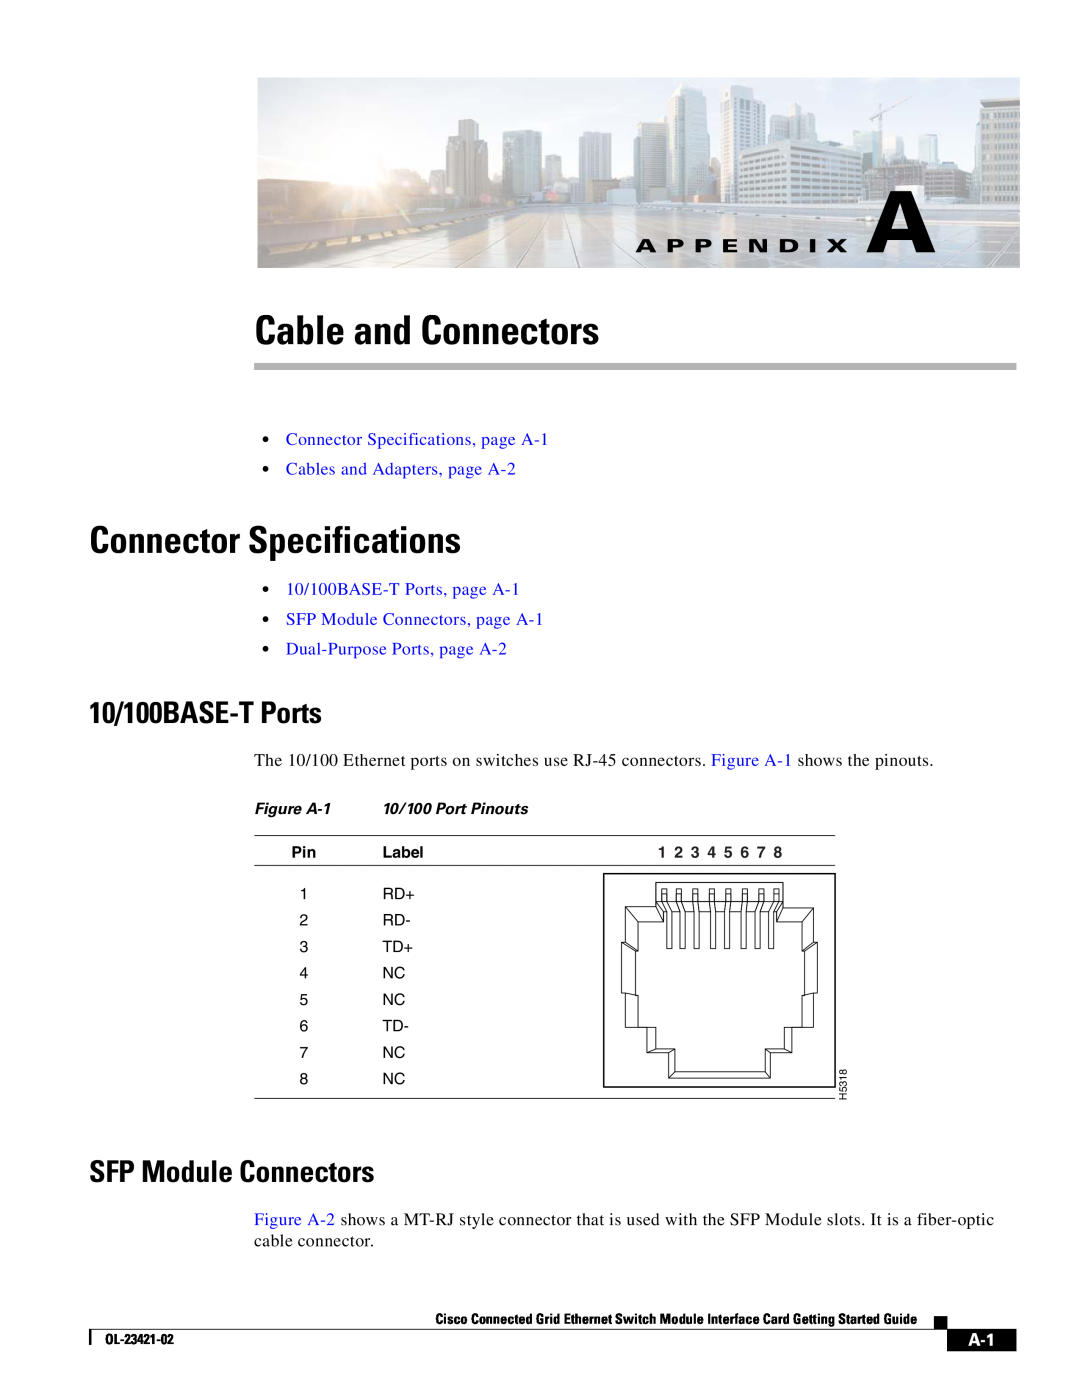 Cisco Systems OL-23421-02 manual Cable and Connectors, Connector Specifications, SFP Module Connectors, A P P E N D I X A 